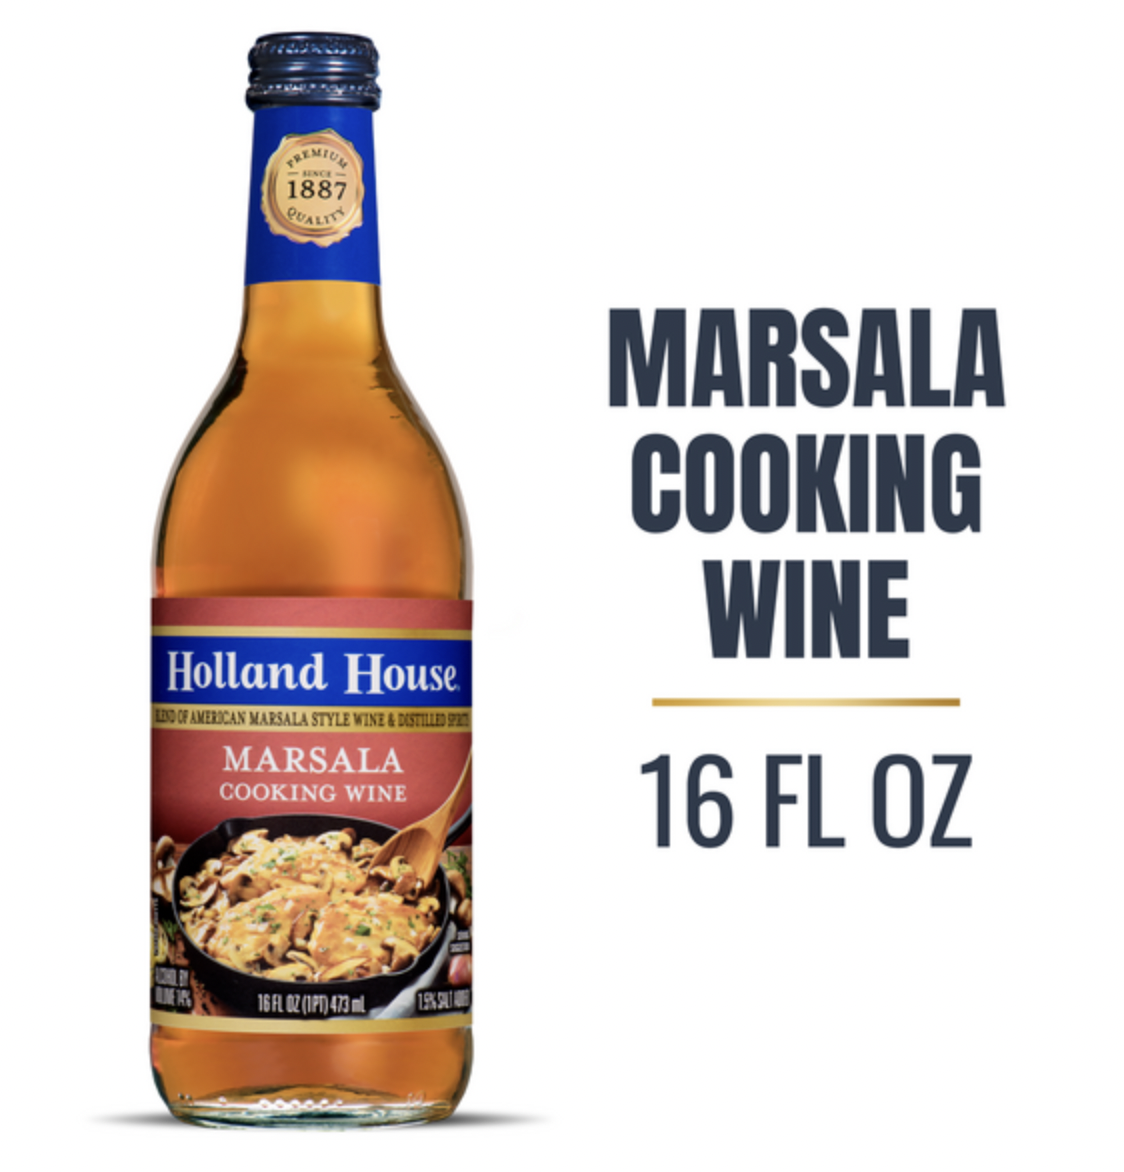 Marsala Cooking Wine - Holland House